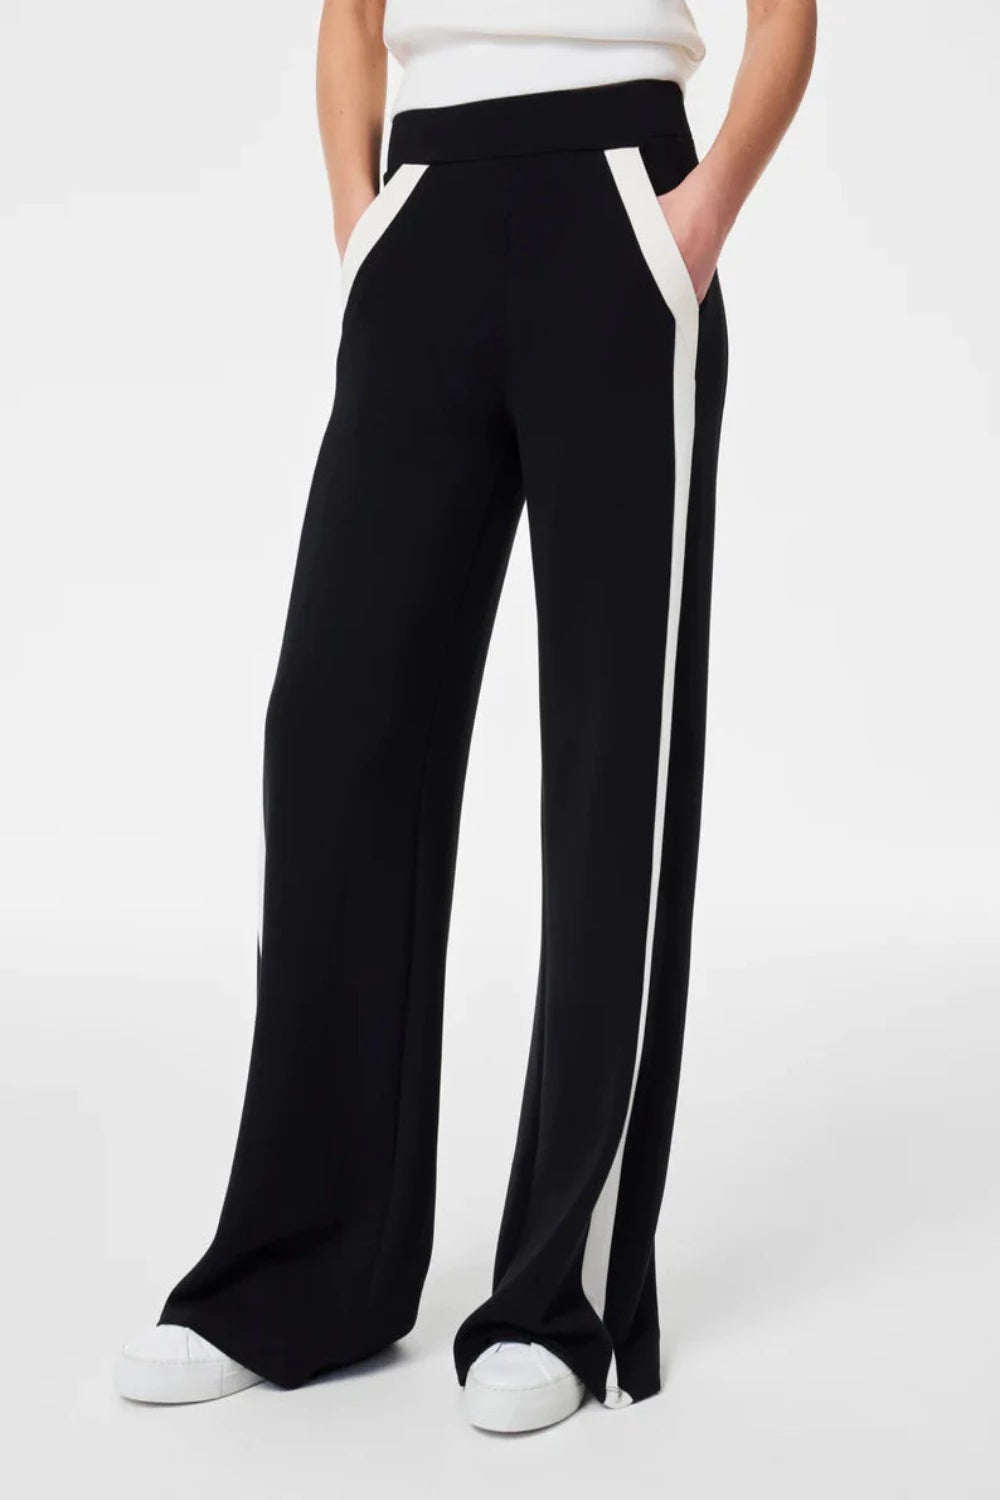 AirEssentials Striped Track Pant in Very Black